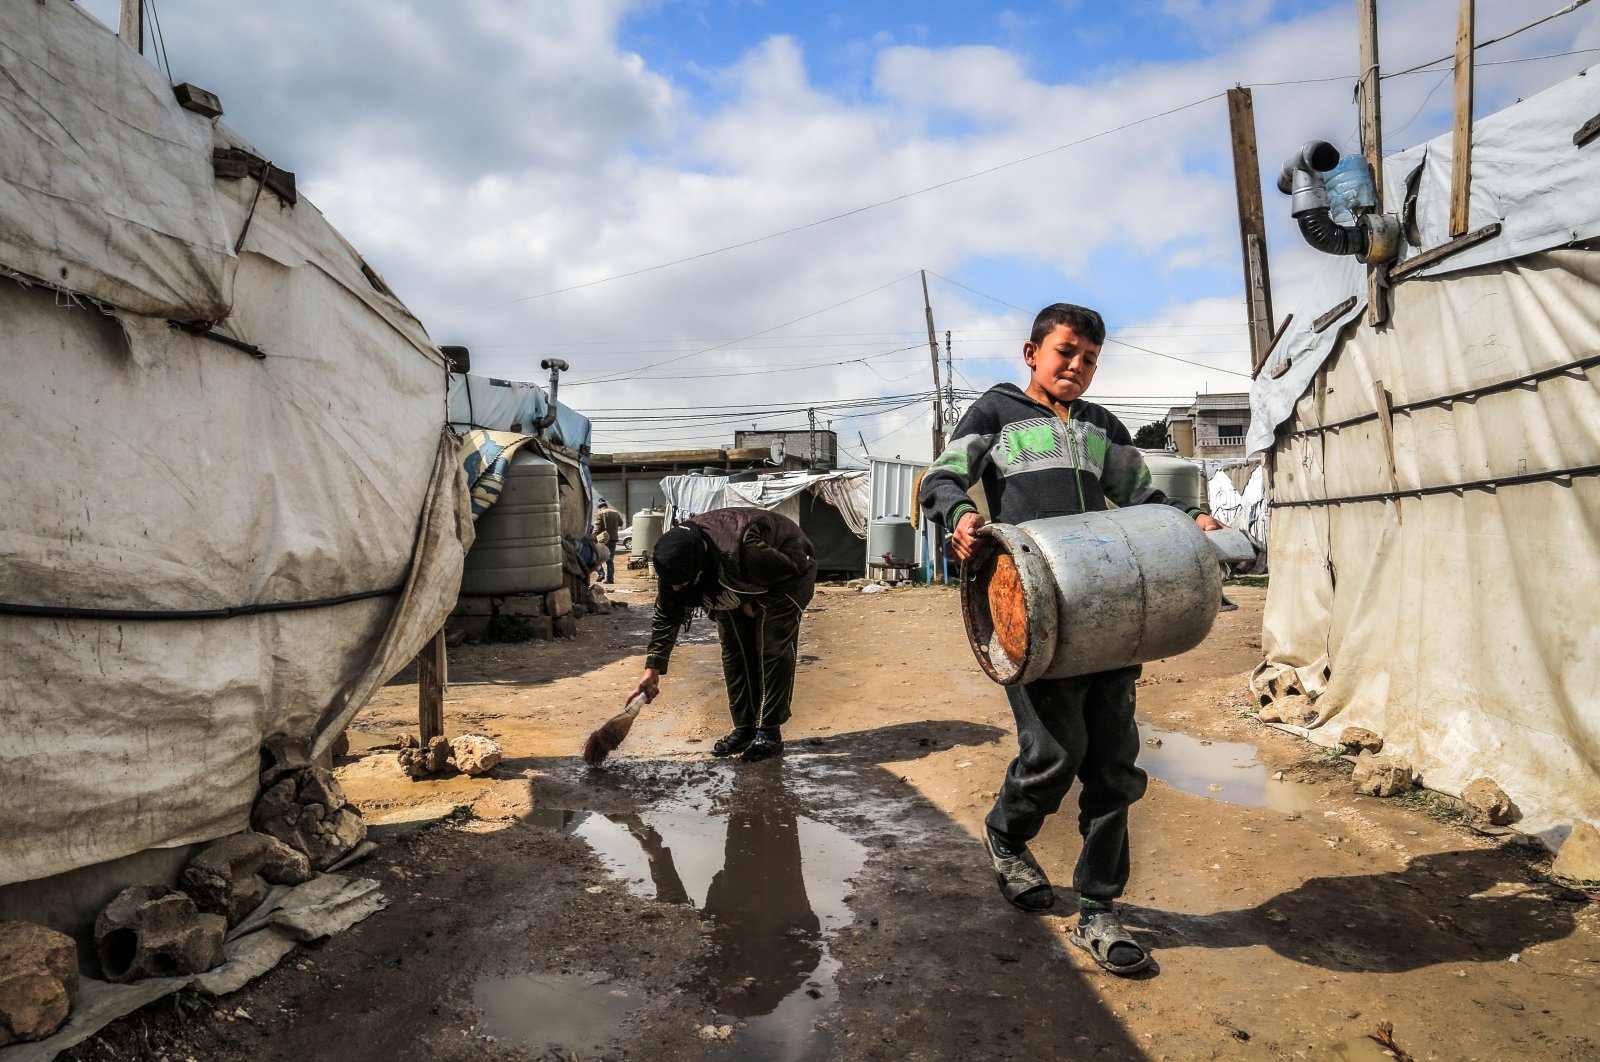 A Syrian refugee clears rainwater outside her tent following heavy rain, at Marj Syrian refugee camp in Lebanon's Bekaa valley, Feb. 20, 2021 (Getty Images)